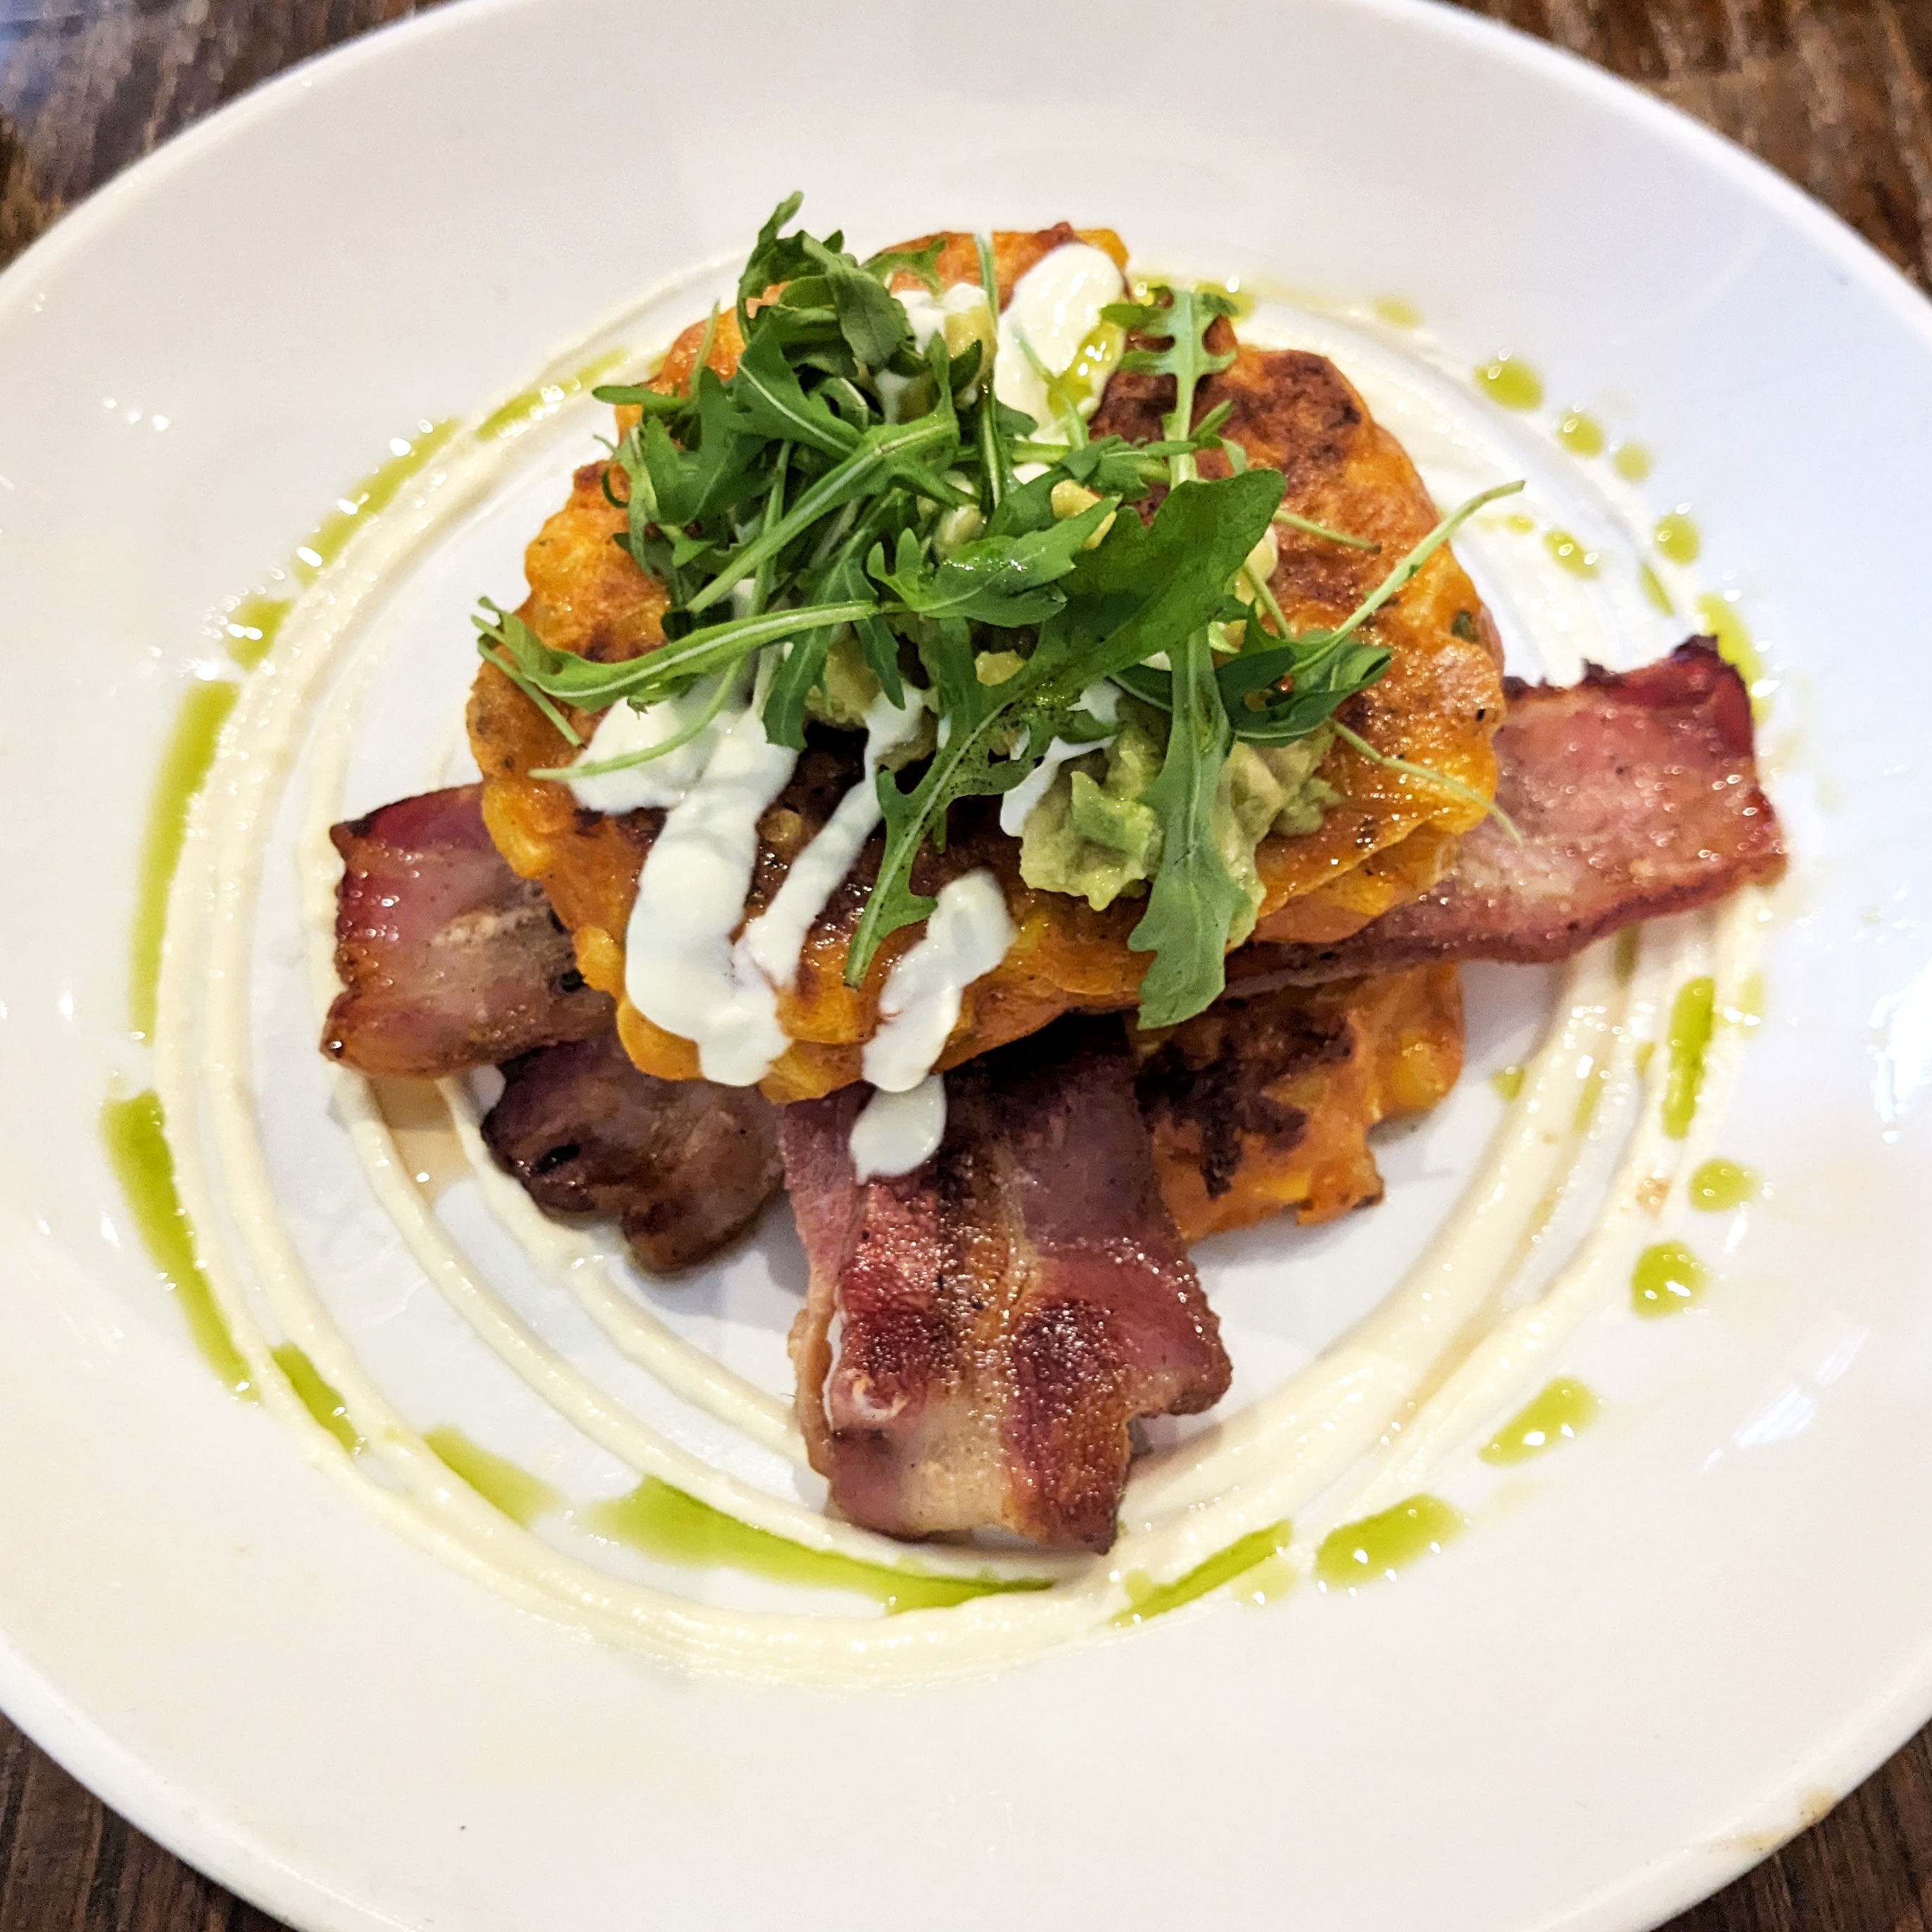 A large white plate filled with sweetcron fritters, streaky bacon, spinach and avocado at Lantana London, one of the best brunch places in London Bridge